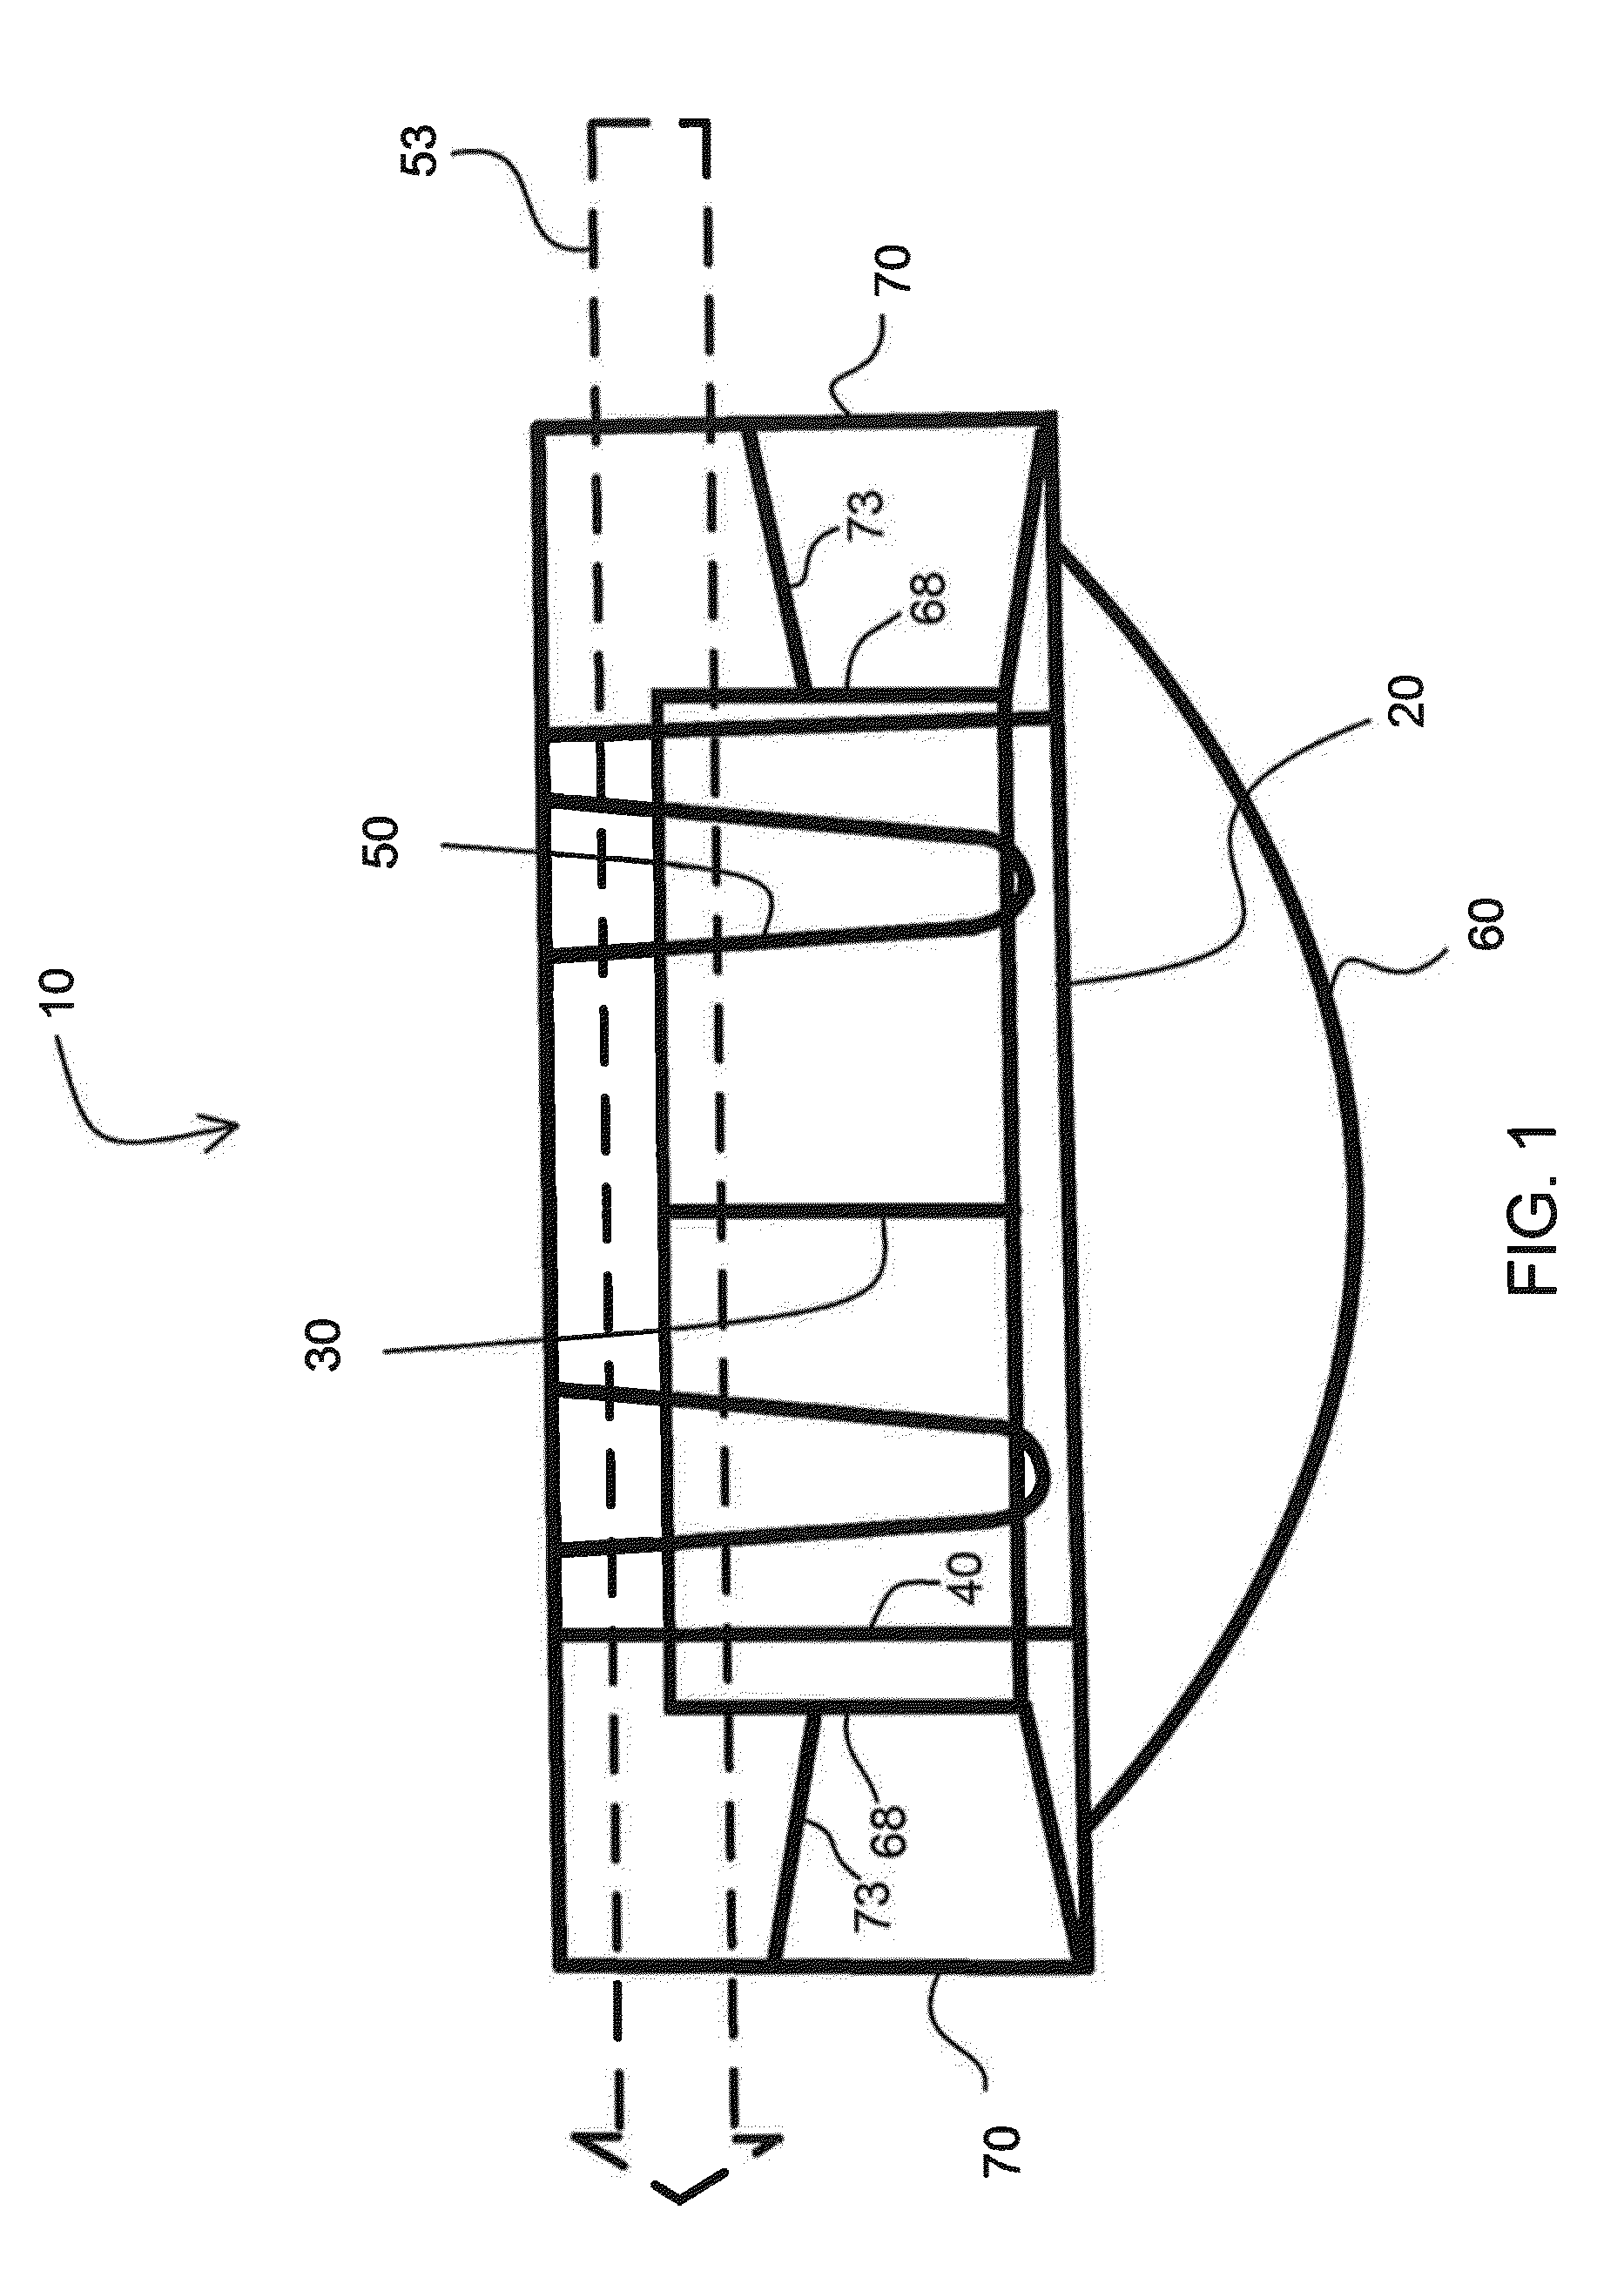 Apparatus, method and system for harvesting, handling and packing berries picked directly from the plant